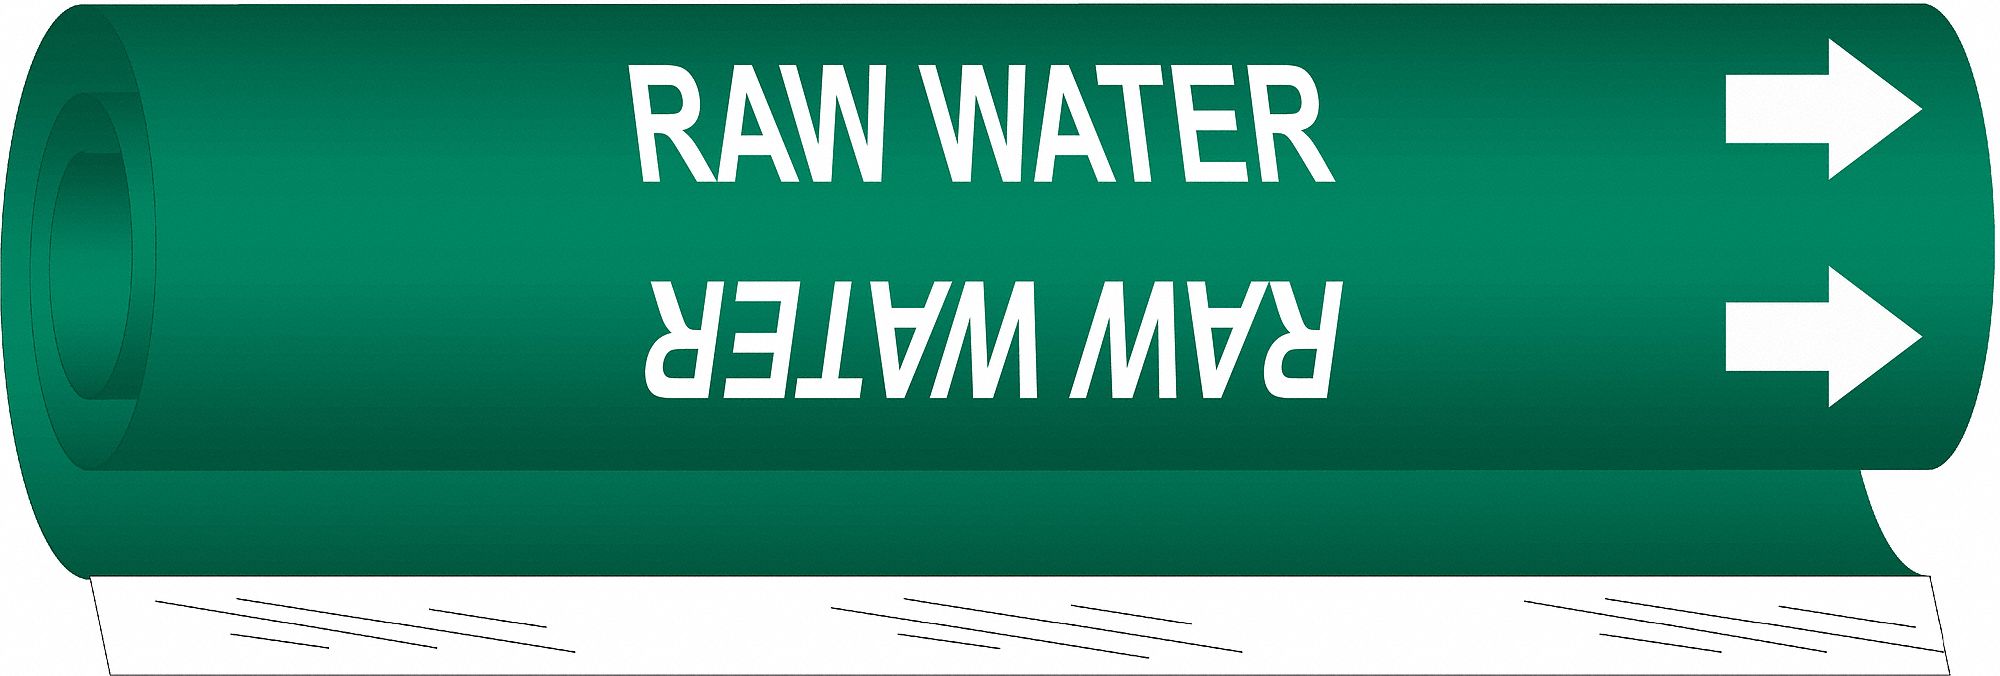 Pipe Marker,Raw Water,Gn,2-1/2to7-7/8 In